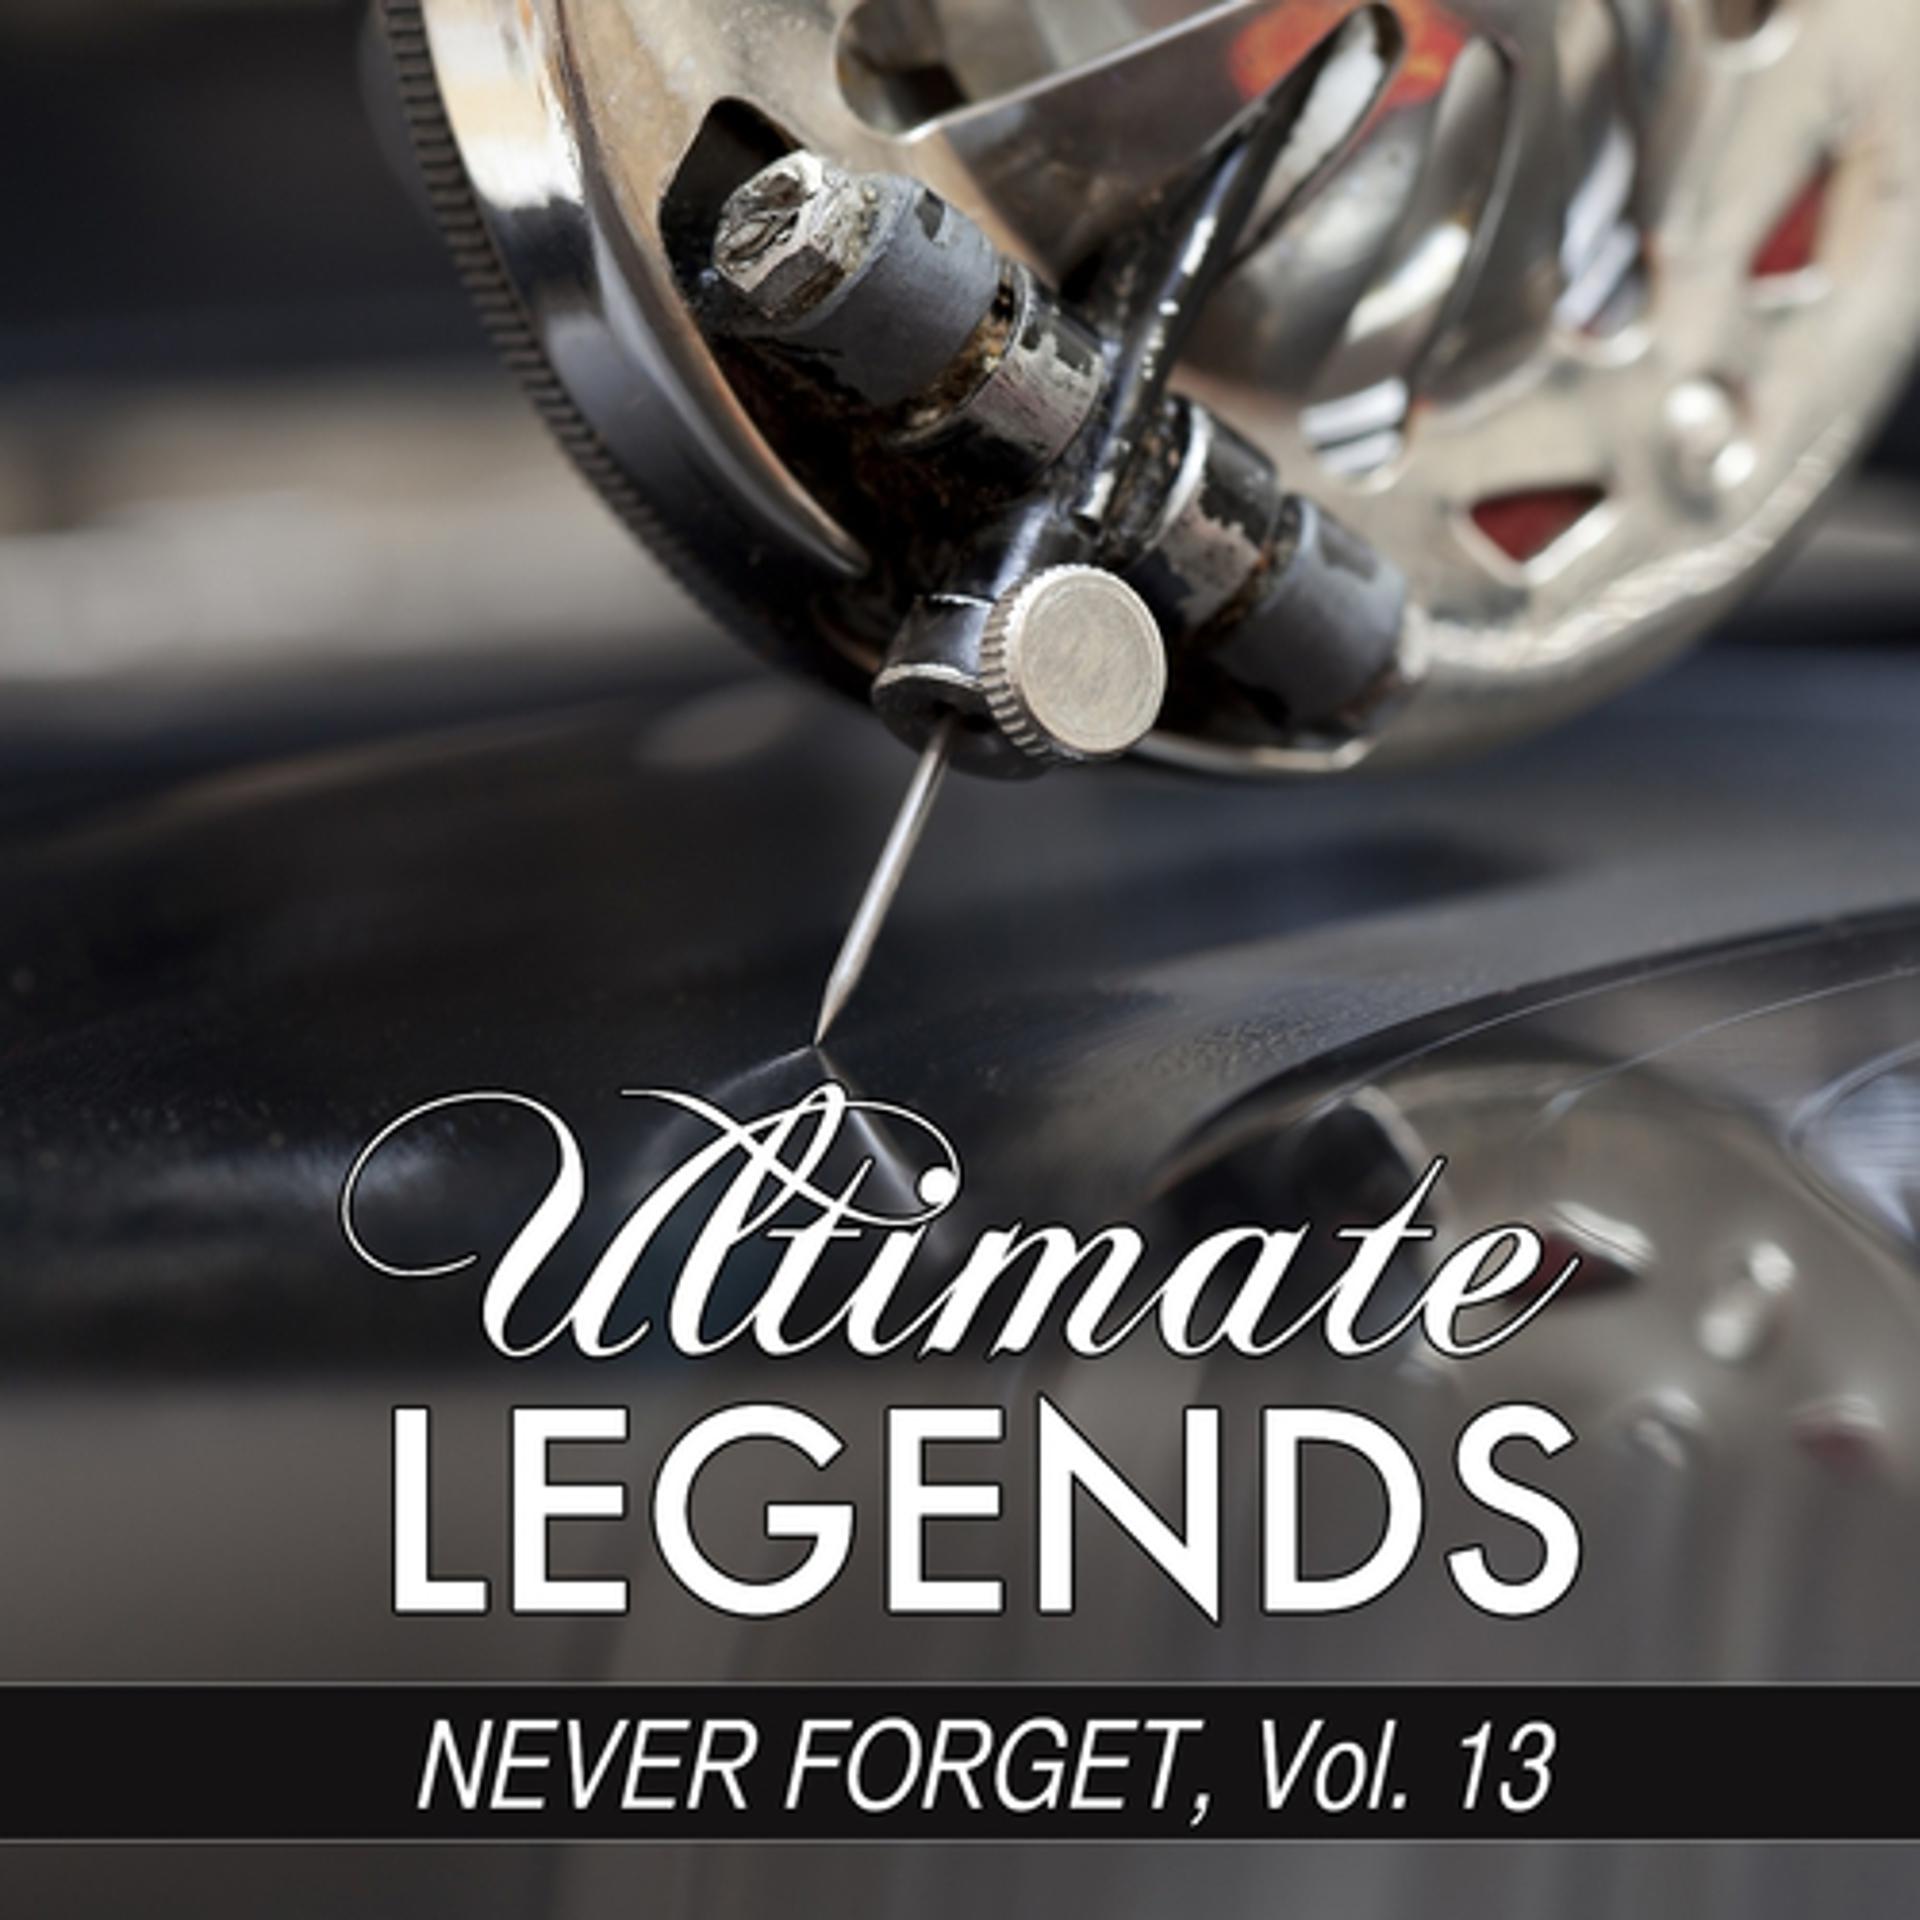 Постер альбома Never Forget, Vol. 13 (Ultimate Legends Presents Never Forget, Vol. 13)